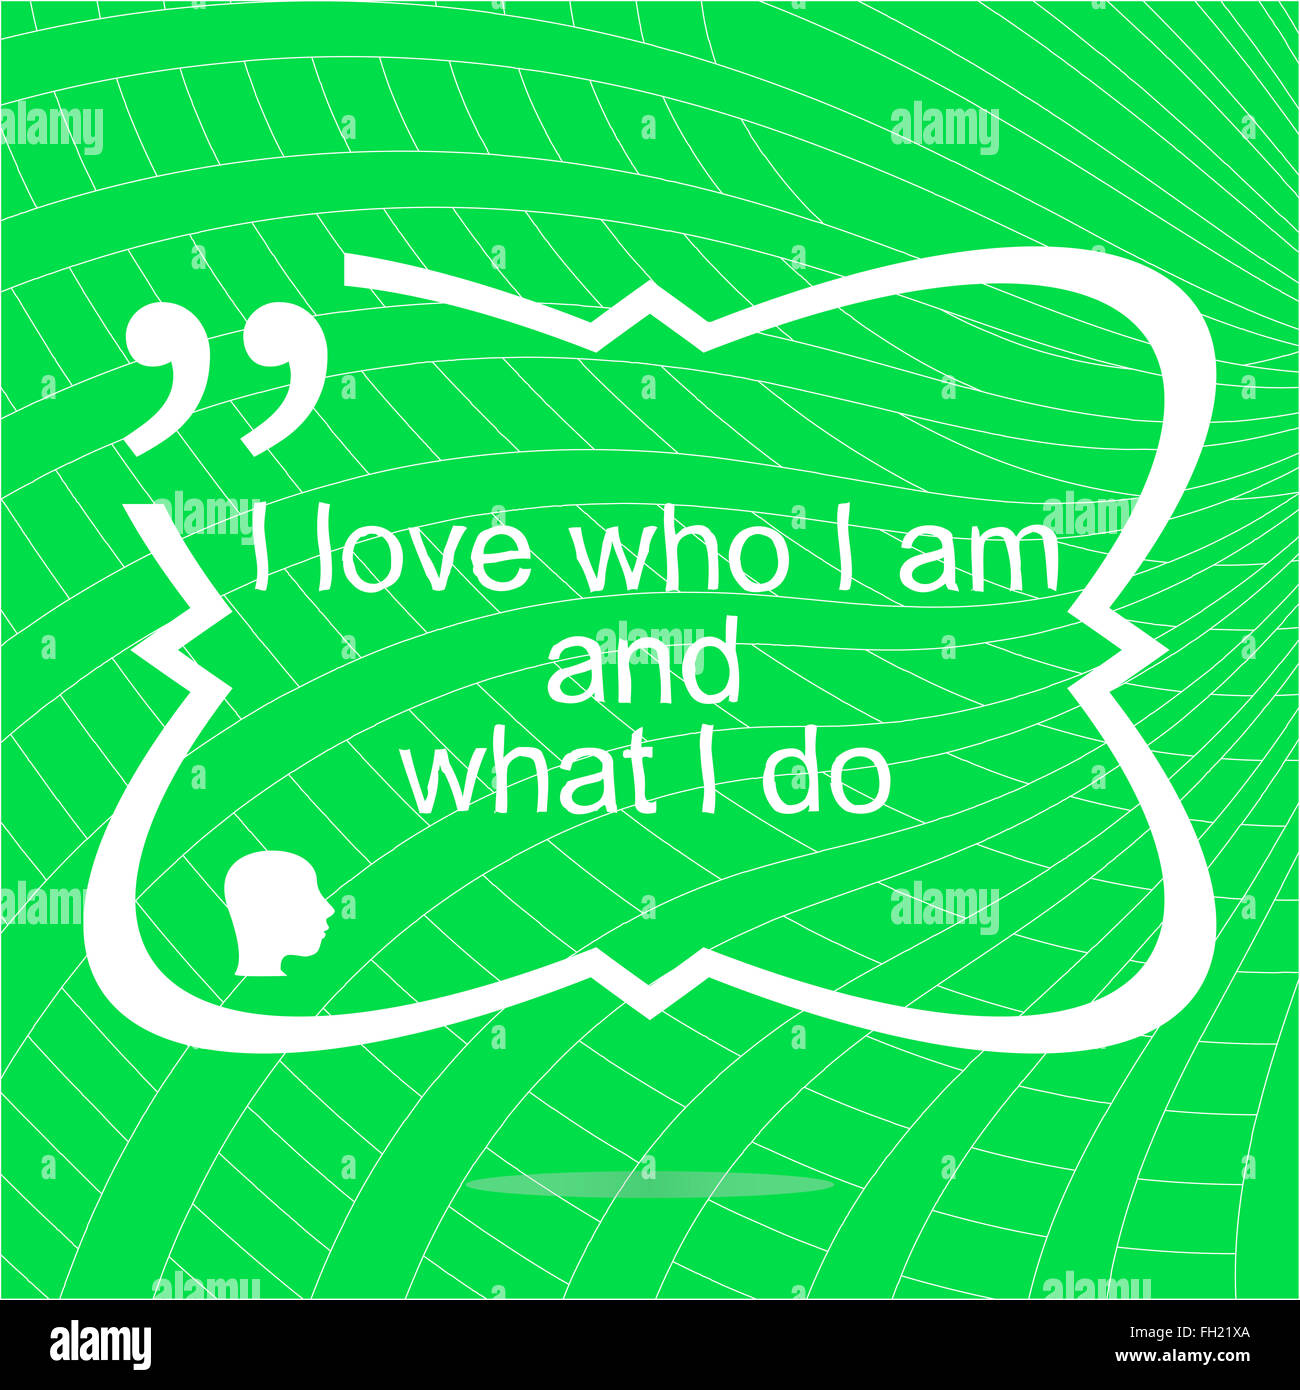 I love who I am and what I do. Inspirational motivational quote. Simple trendy design. Positive quote Stock Photo